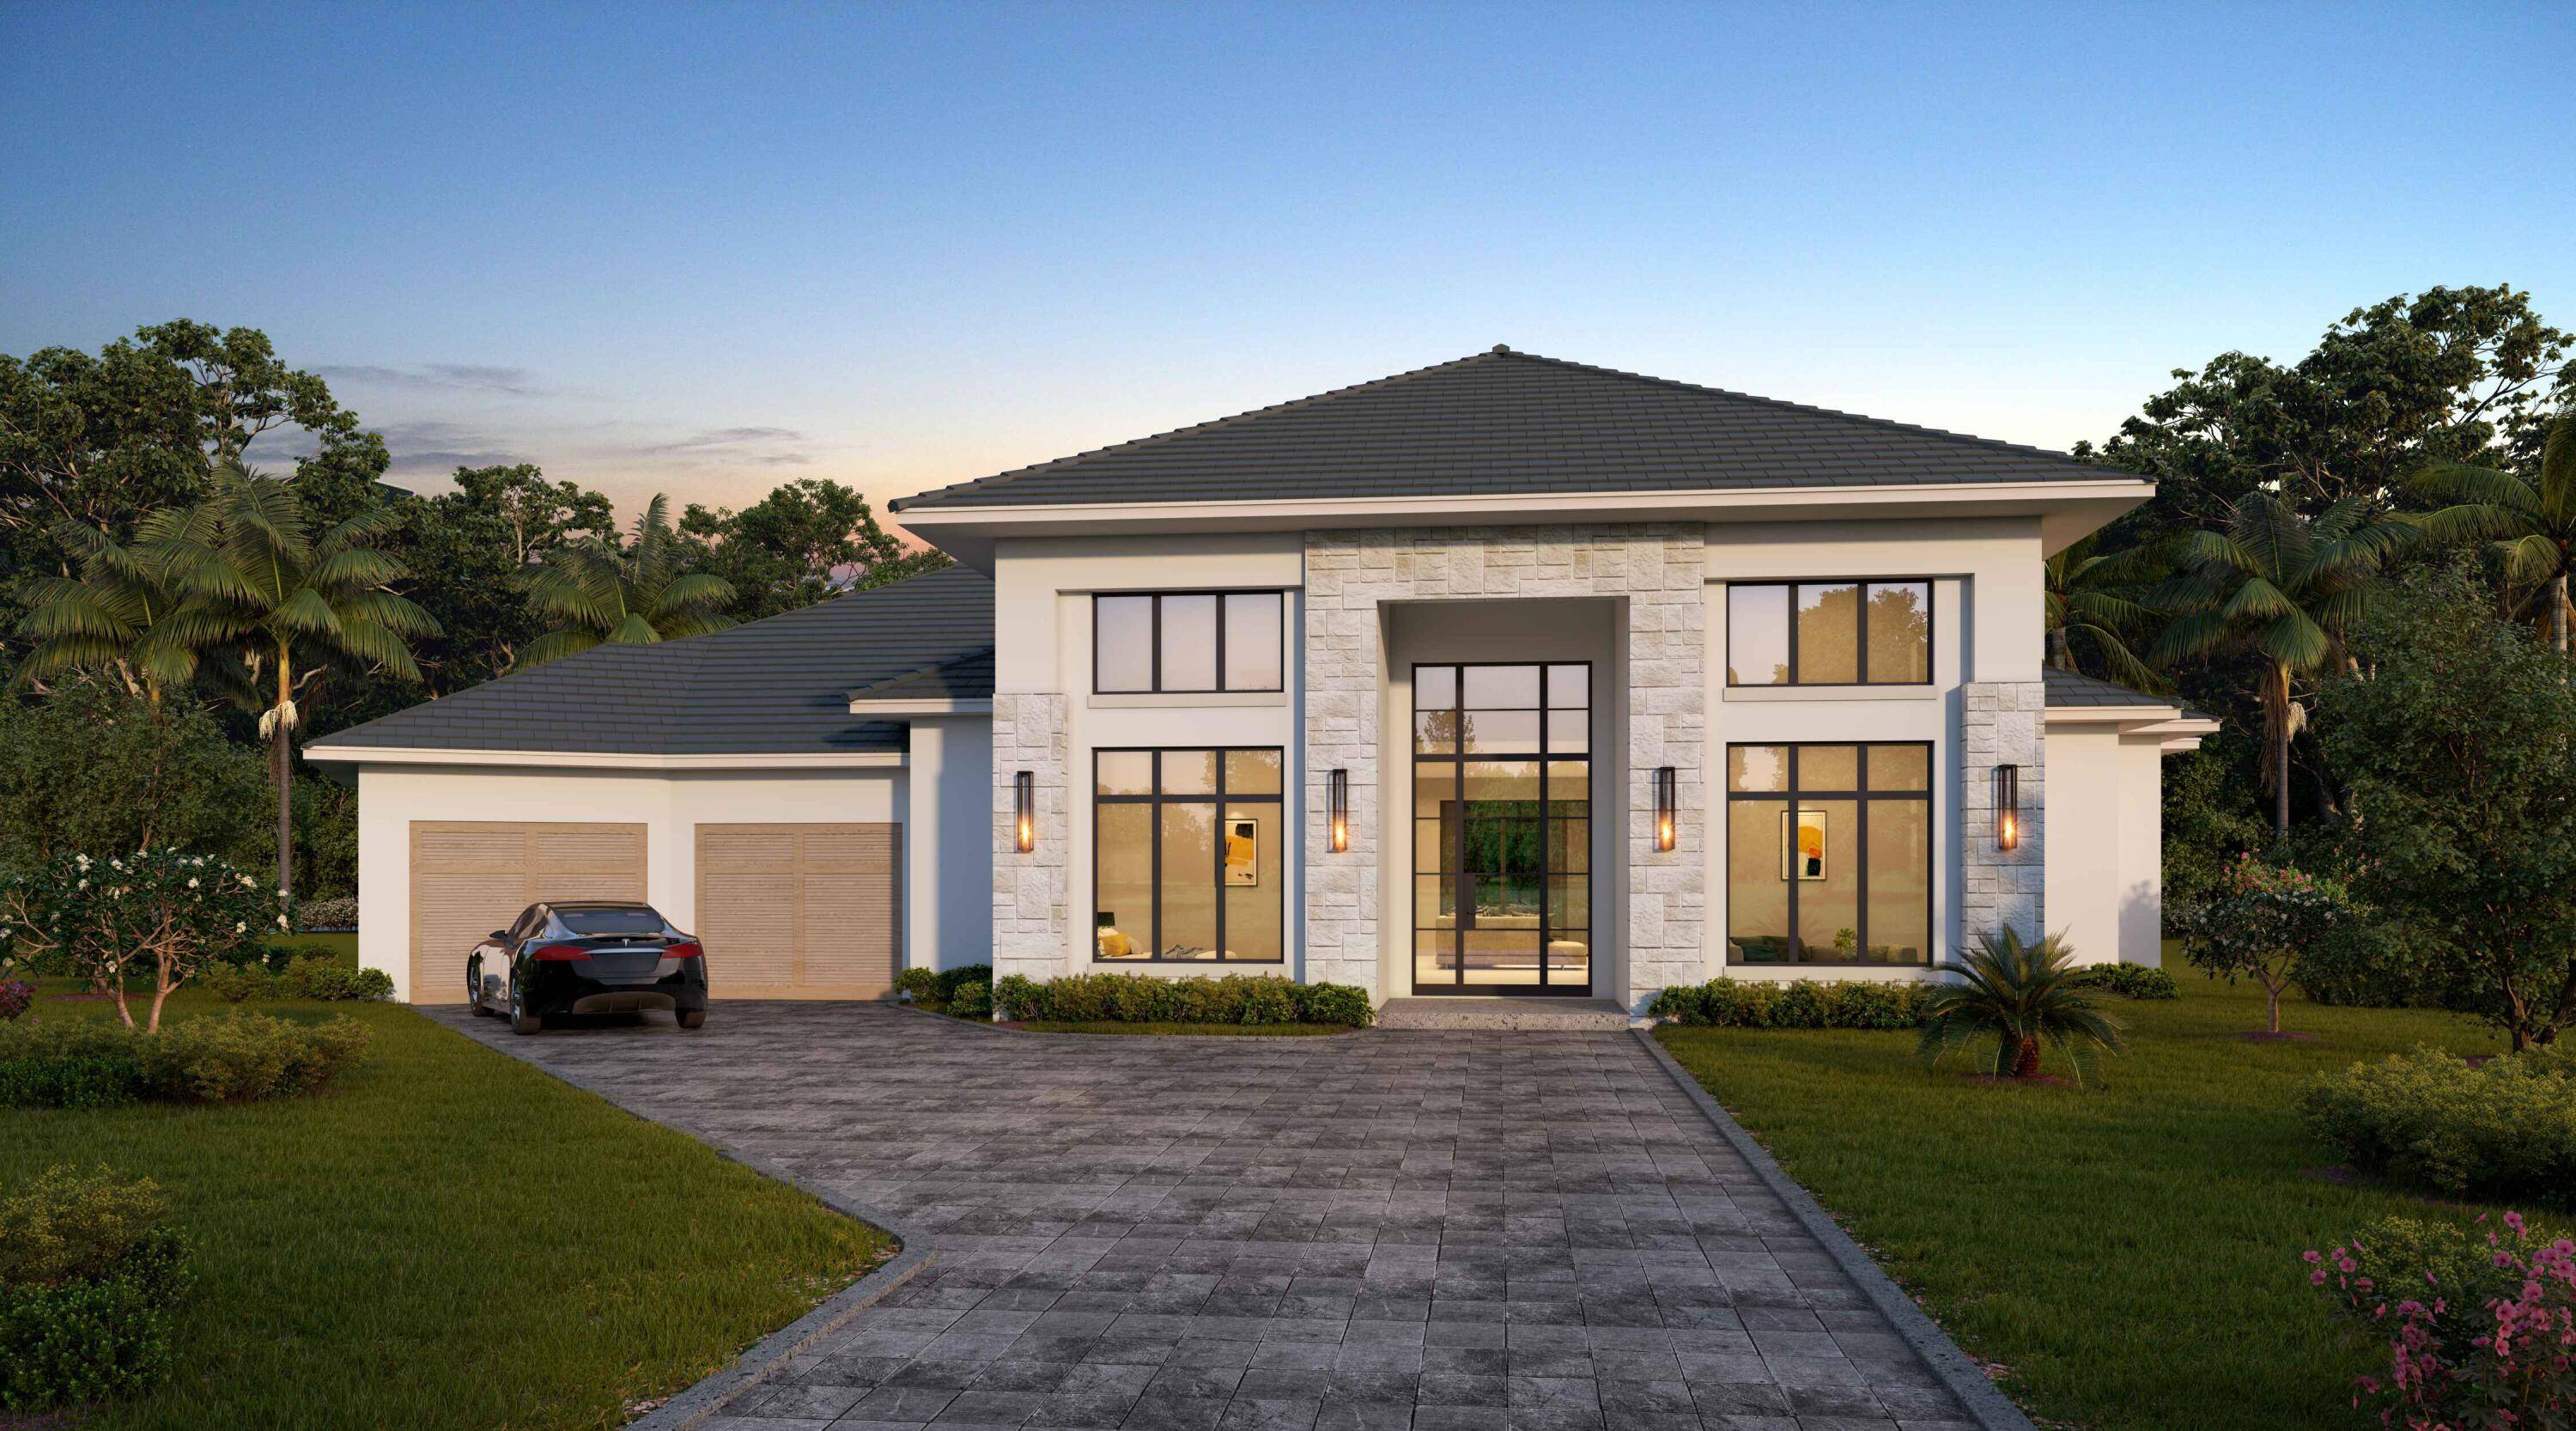 Once in a lifetime opportunity to purchase a brand new construction luxury estate on the established, highly coveted street of Golf Brook Drive in the Palm Beach Polo Club !